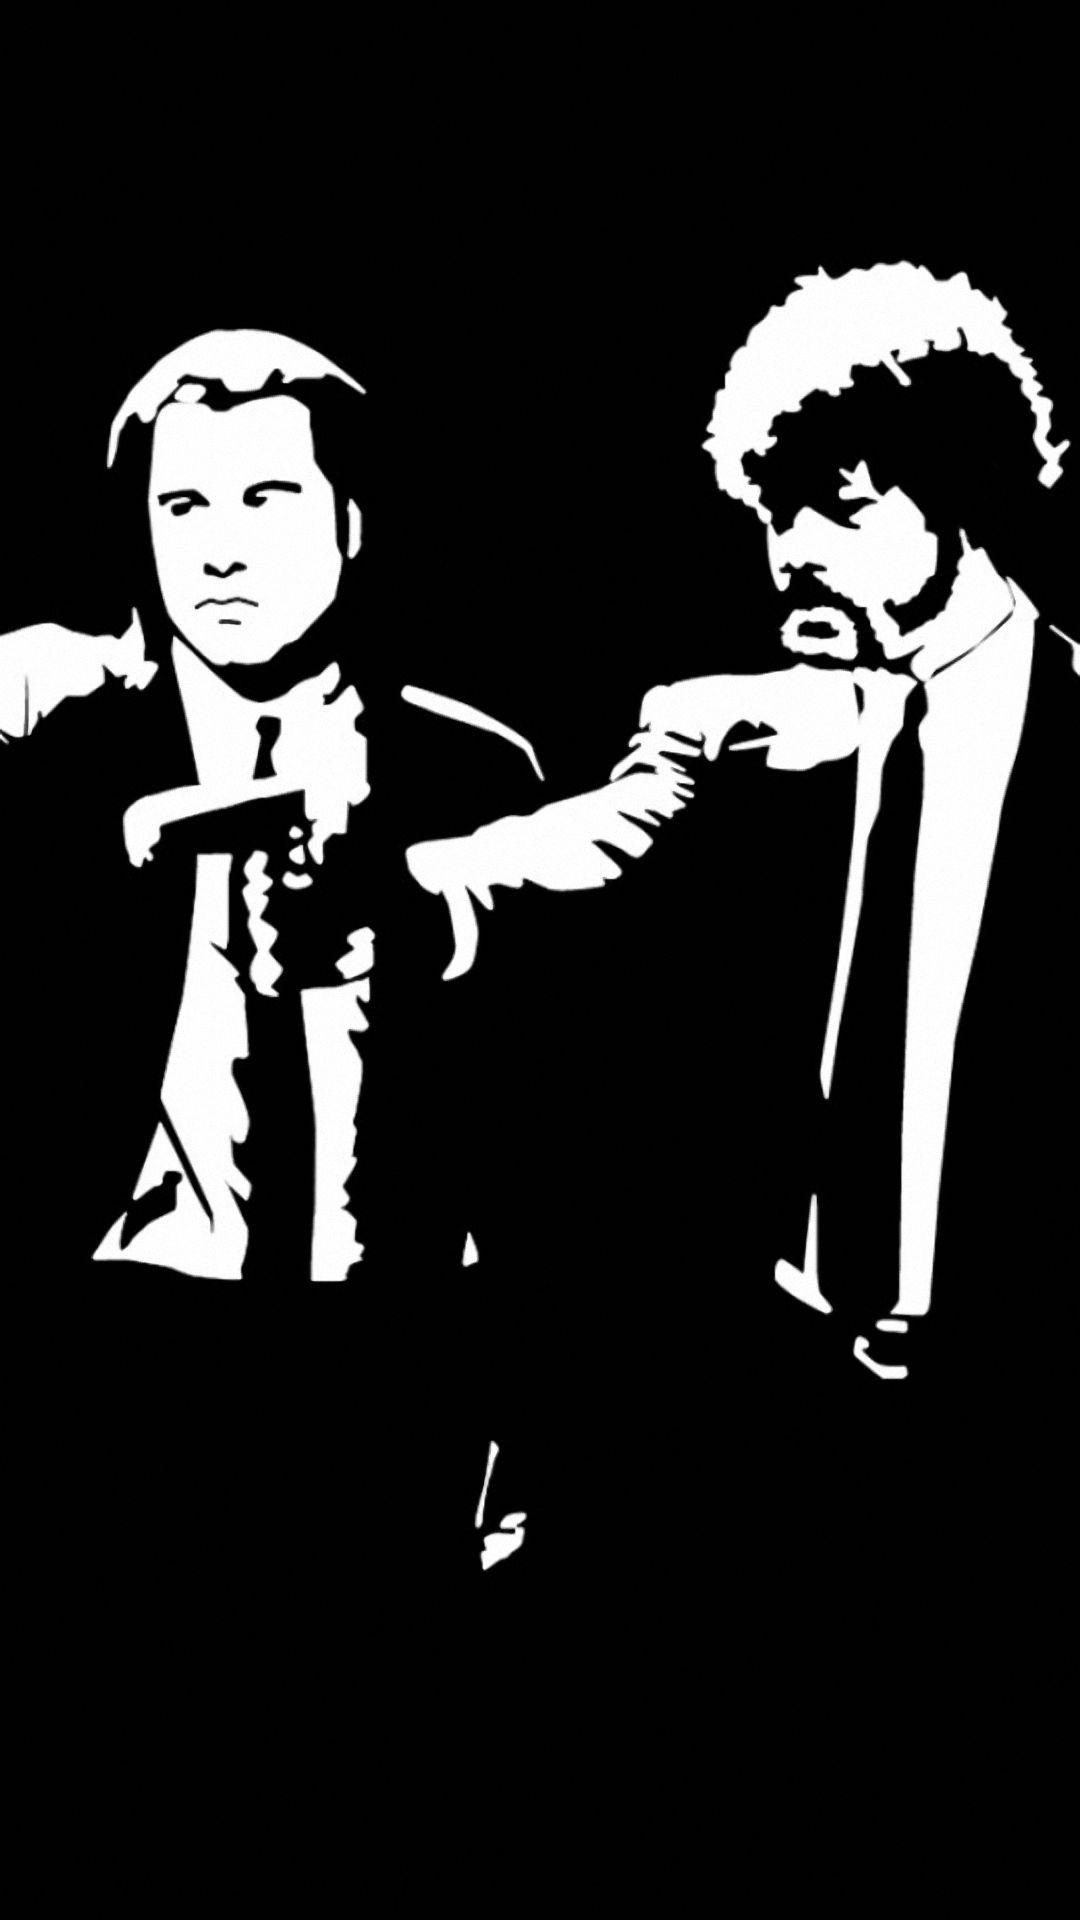 Pulp Fiction Movie Poster Wallpapers  Wallpaper Cave